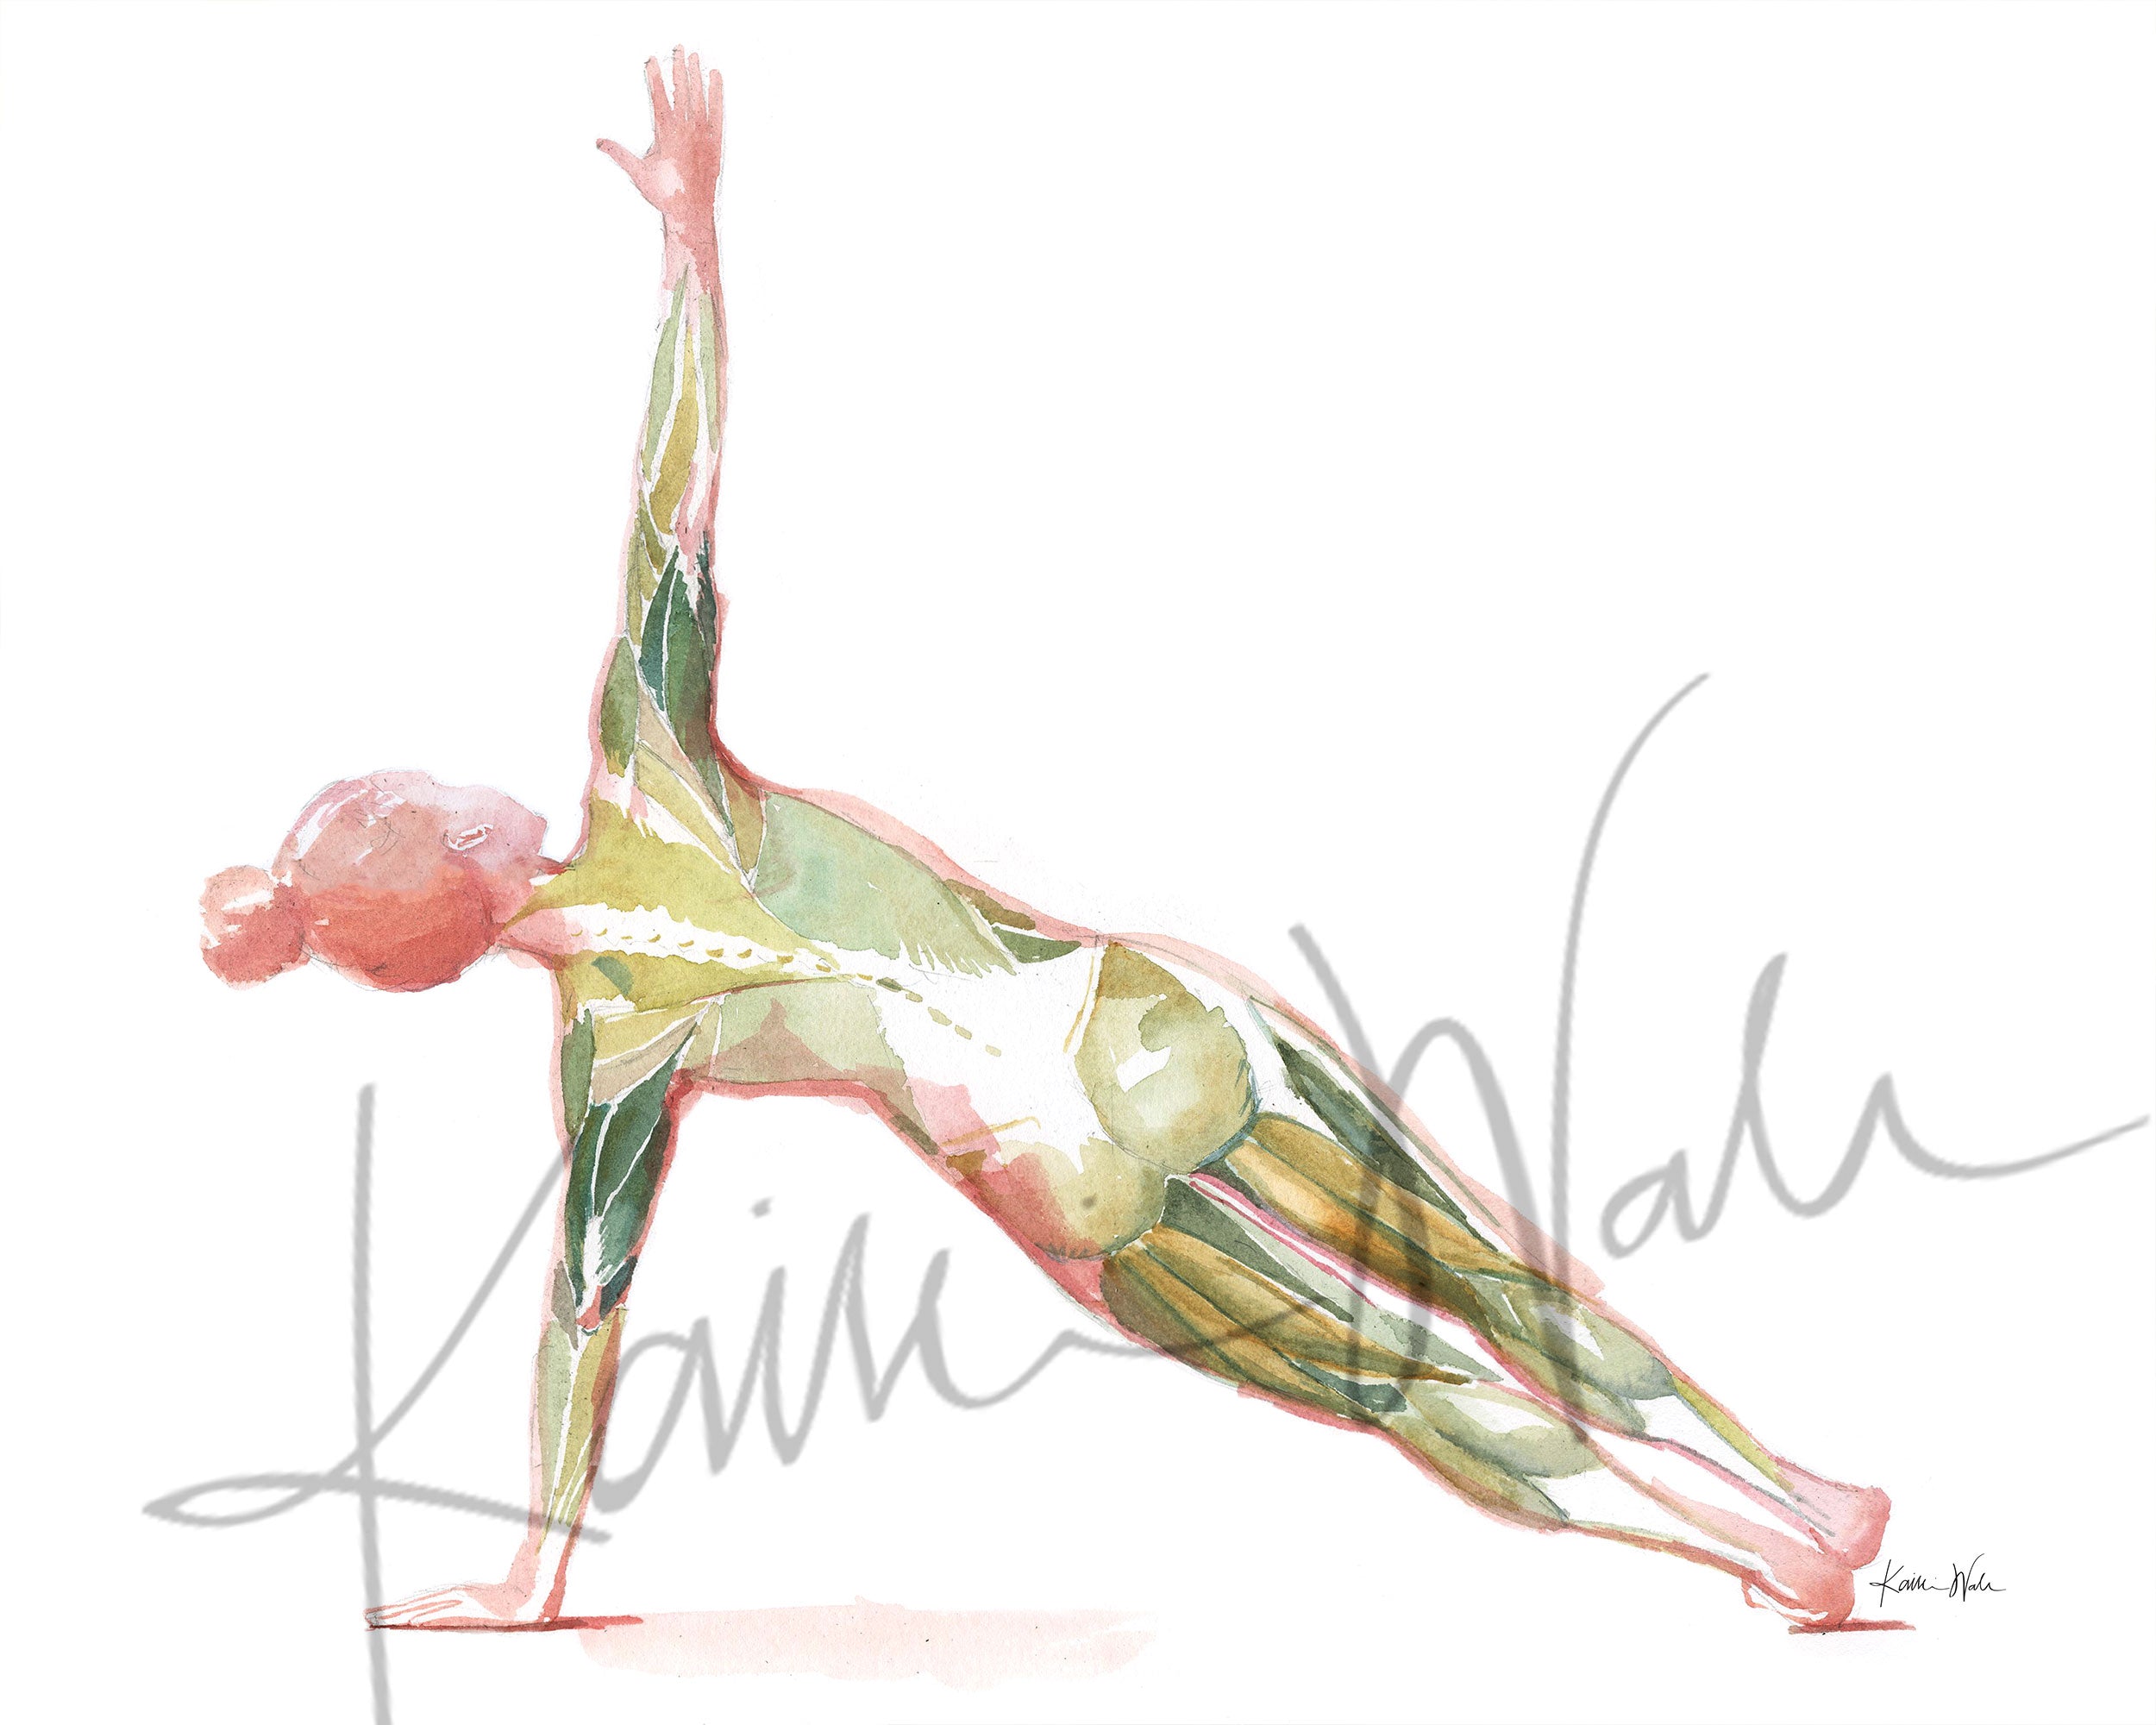 Unframed watercolor painting of a woman performing the side plank yoga pose. The image shows her muscular anatomy while doing the pose.